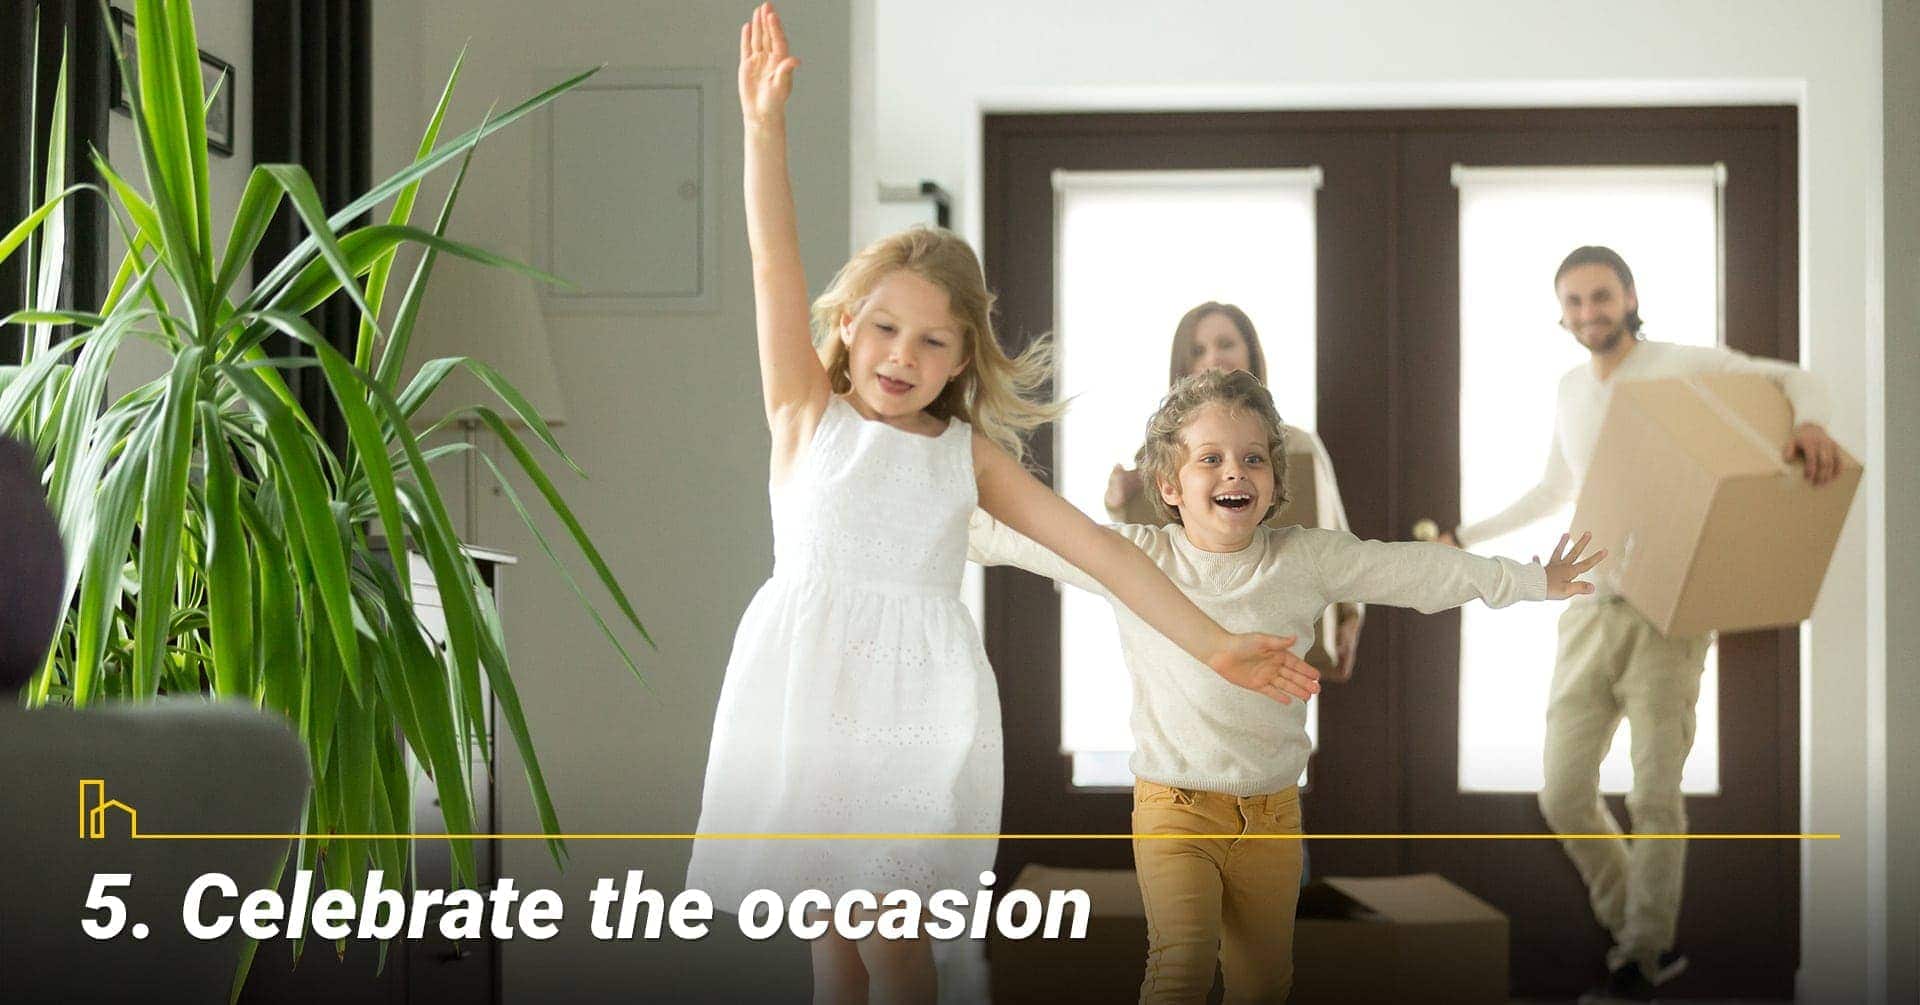 Celebrate the occasion, Enjoy your new home